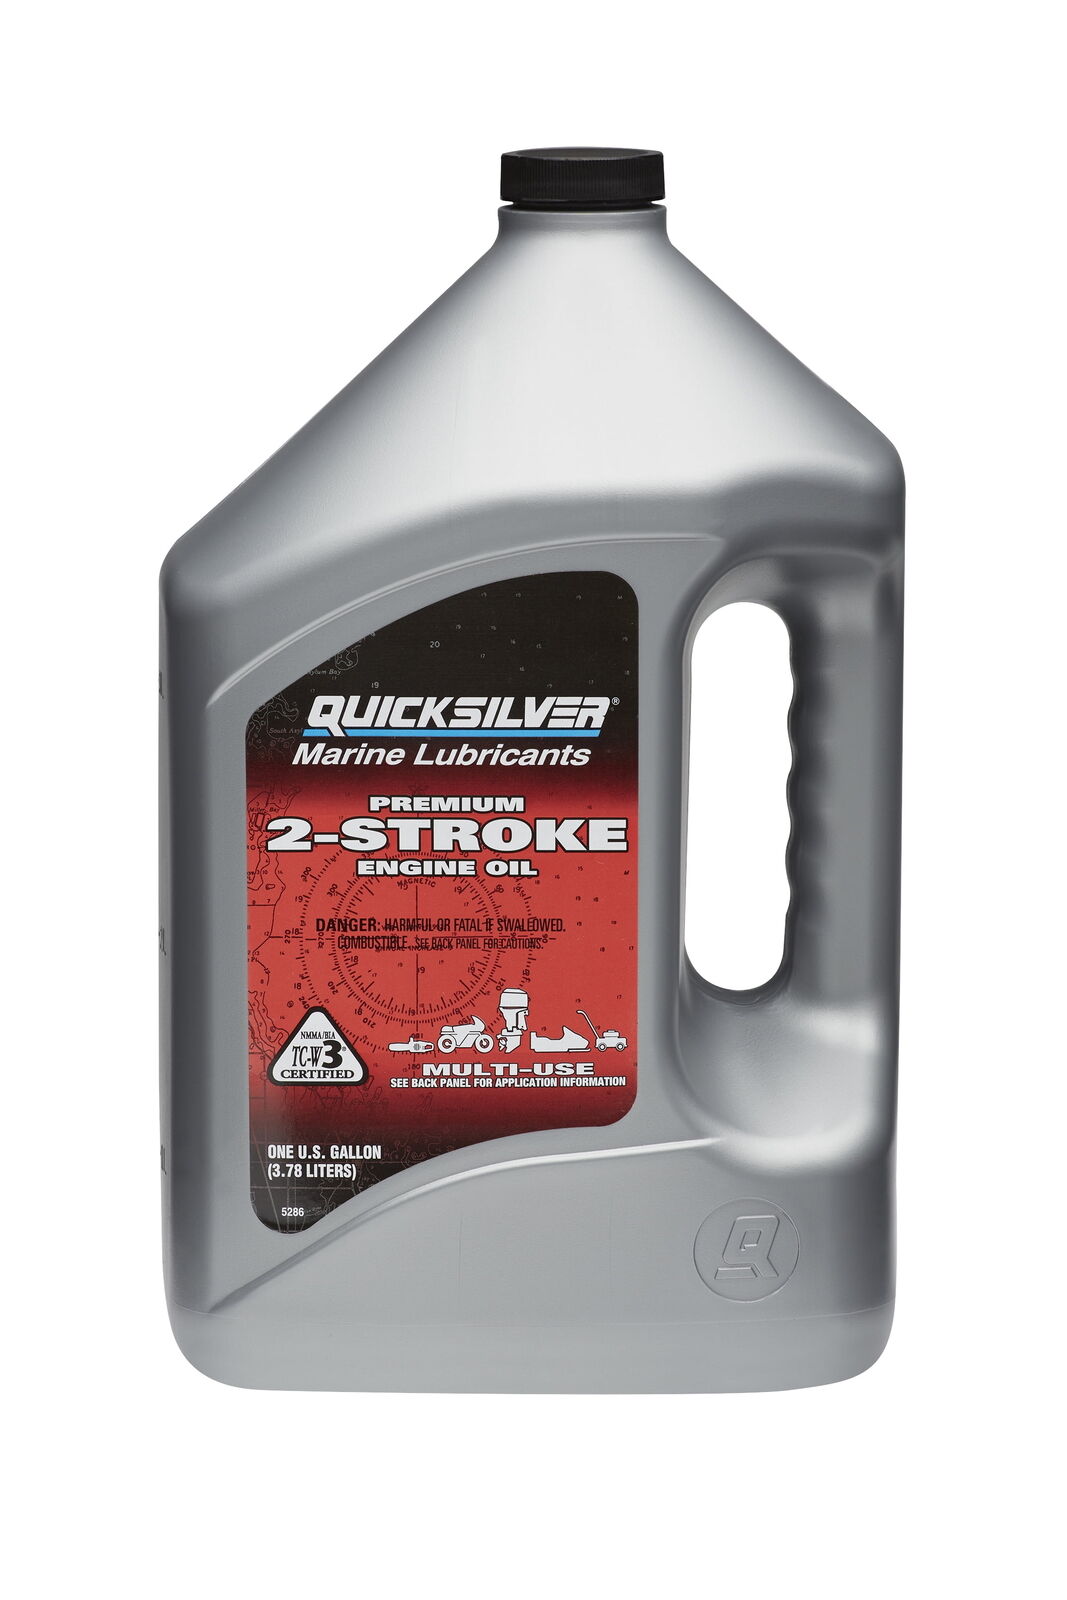 Premium 2-Stroke Engine Oil – Outboards and Powersports - 1 Gallon